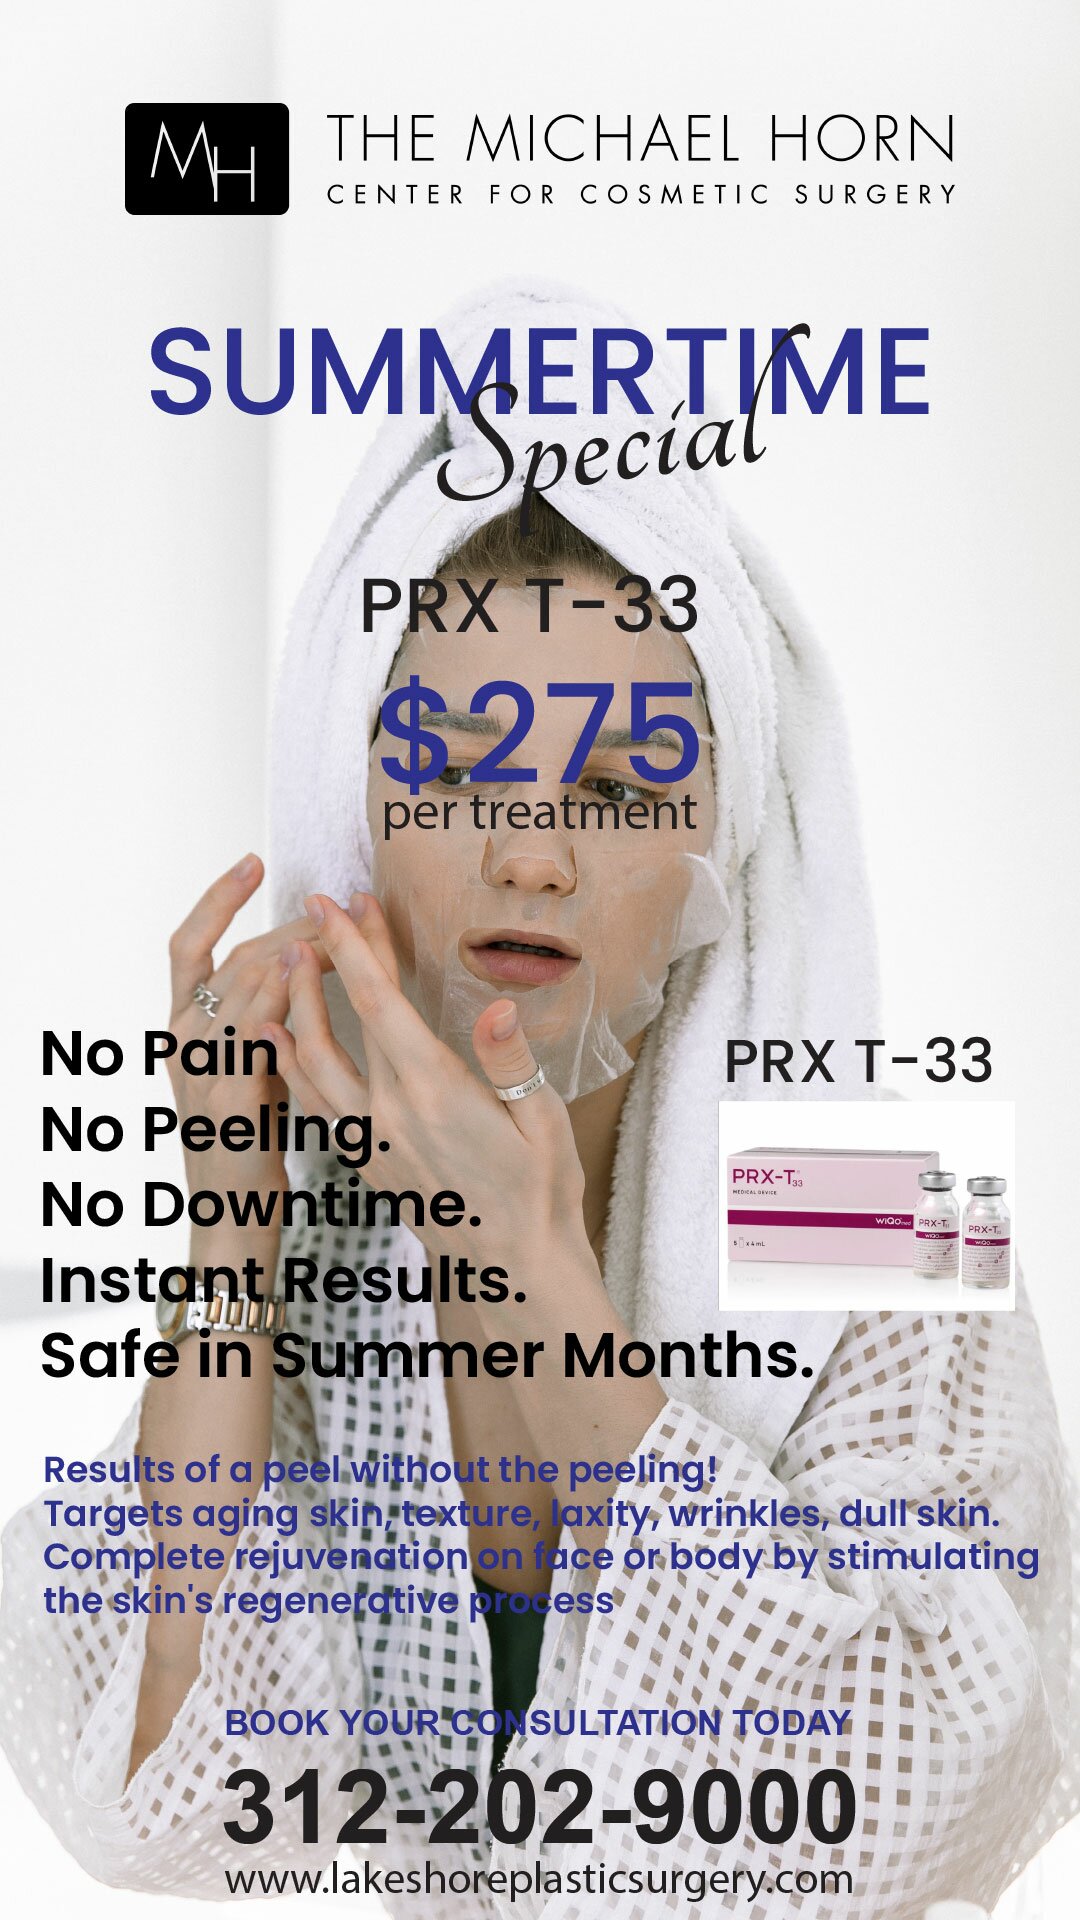 Special Offer - PRX-T $275